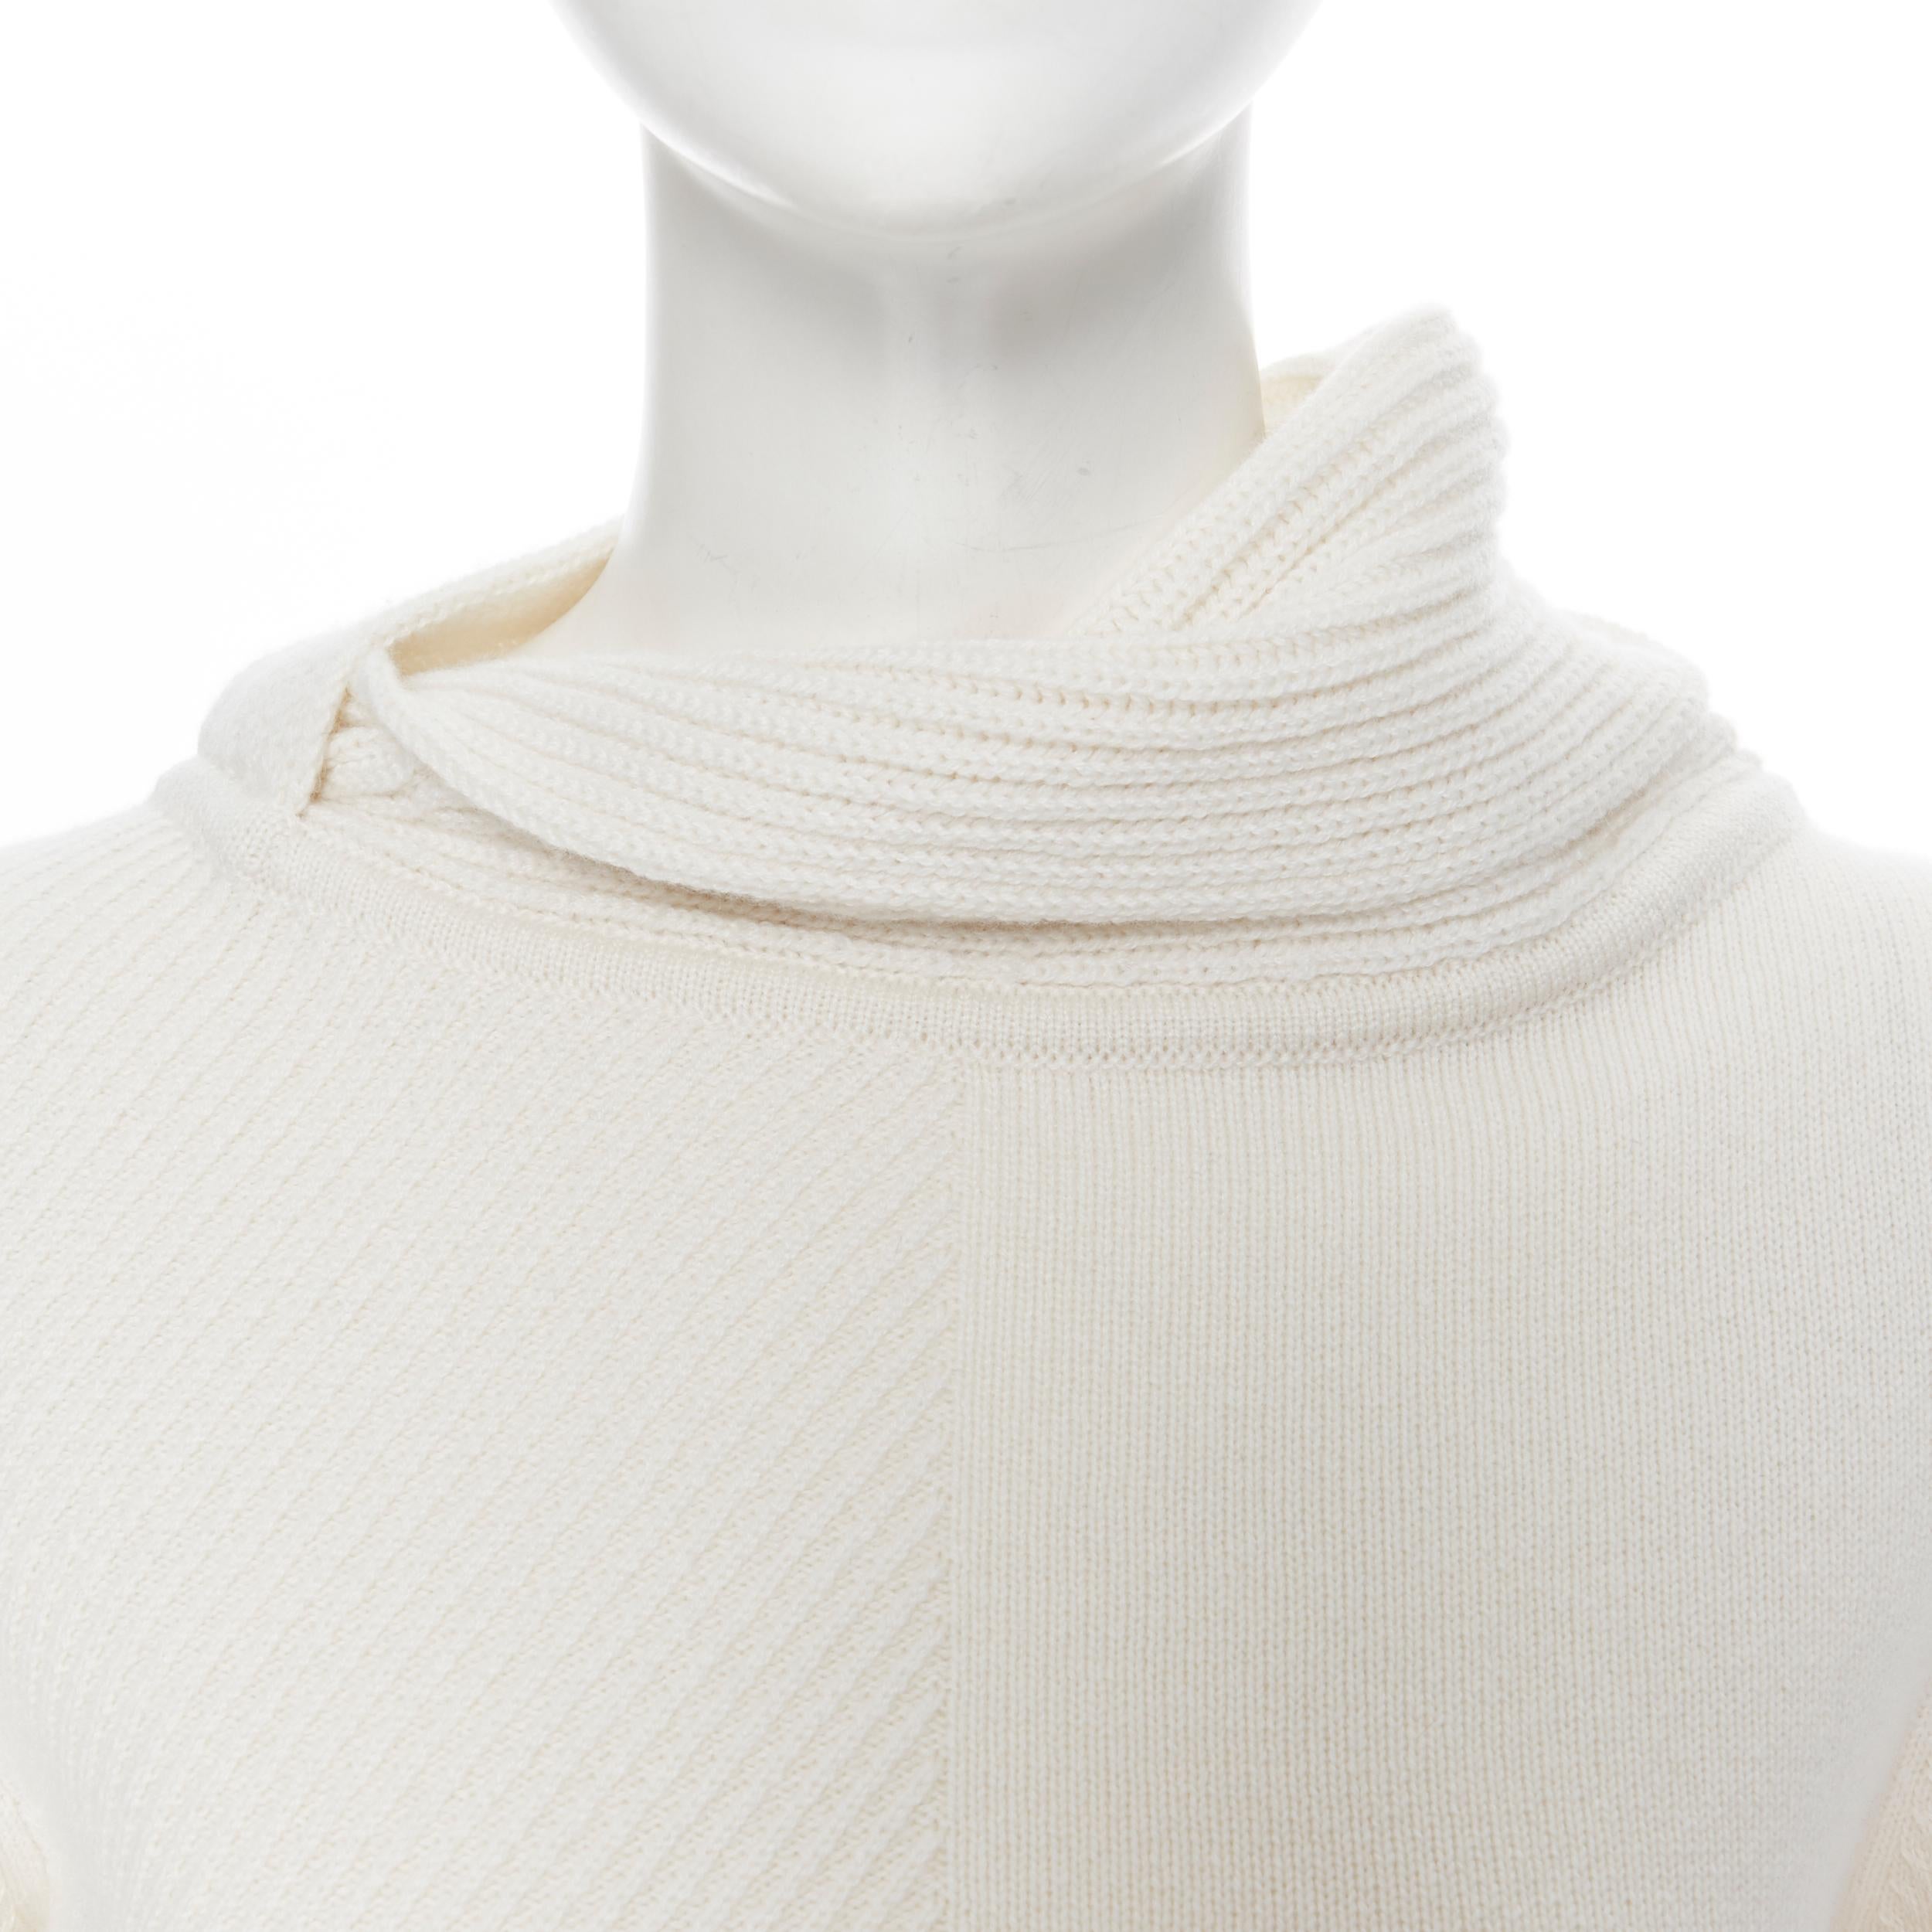 HERMES 100% cashmere ivory beige ribbed knit silver H charm sweater FR34 XS 1